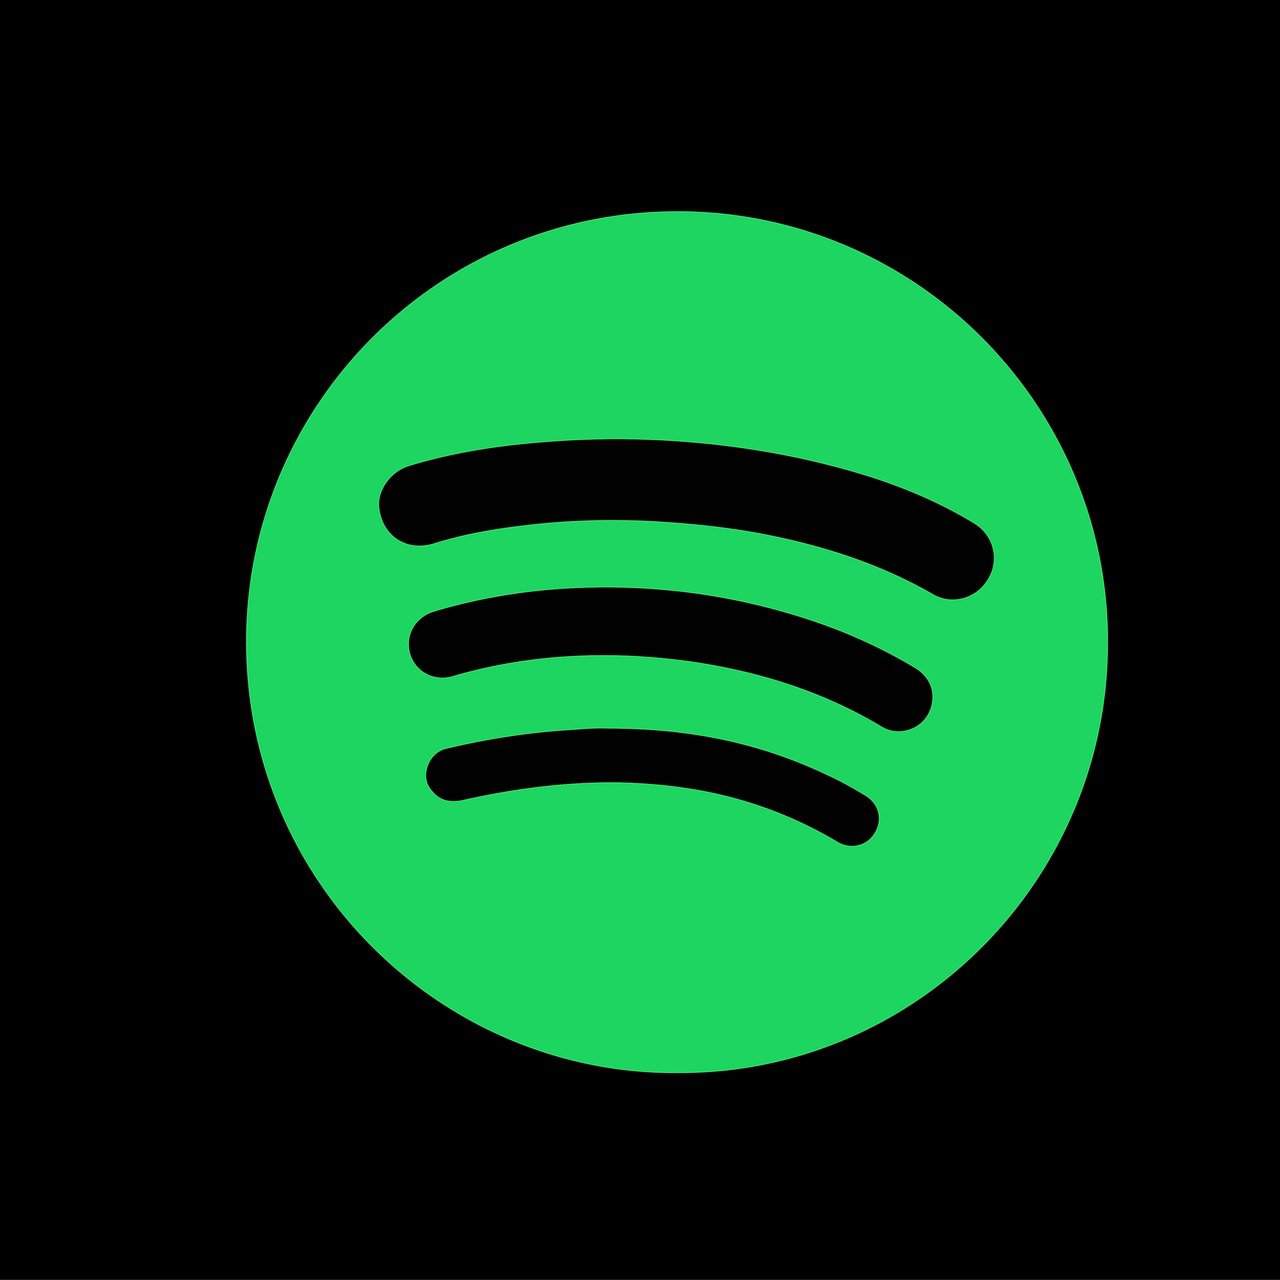 Spotify promised to add Hifi a year ago. Where is it? - hypebot.com